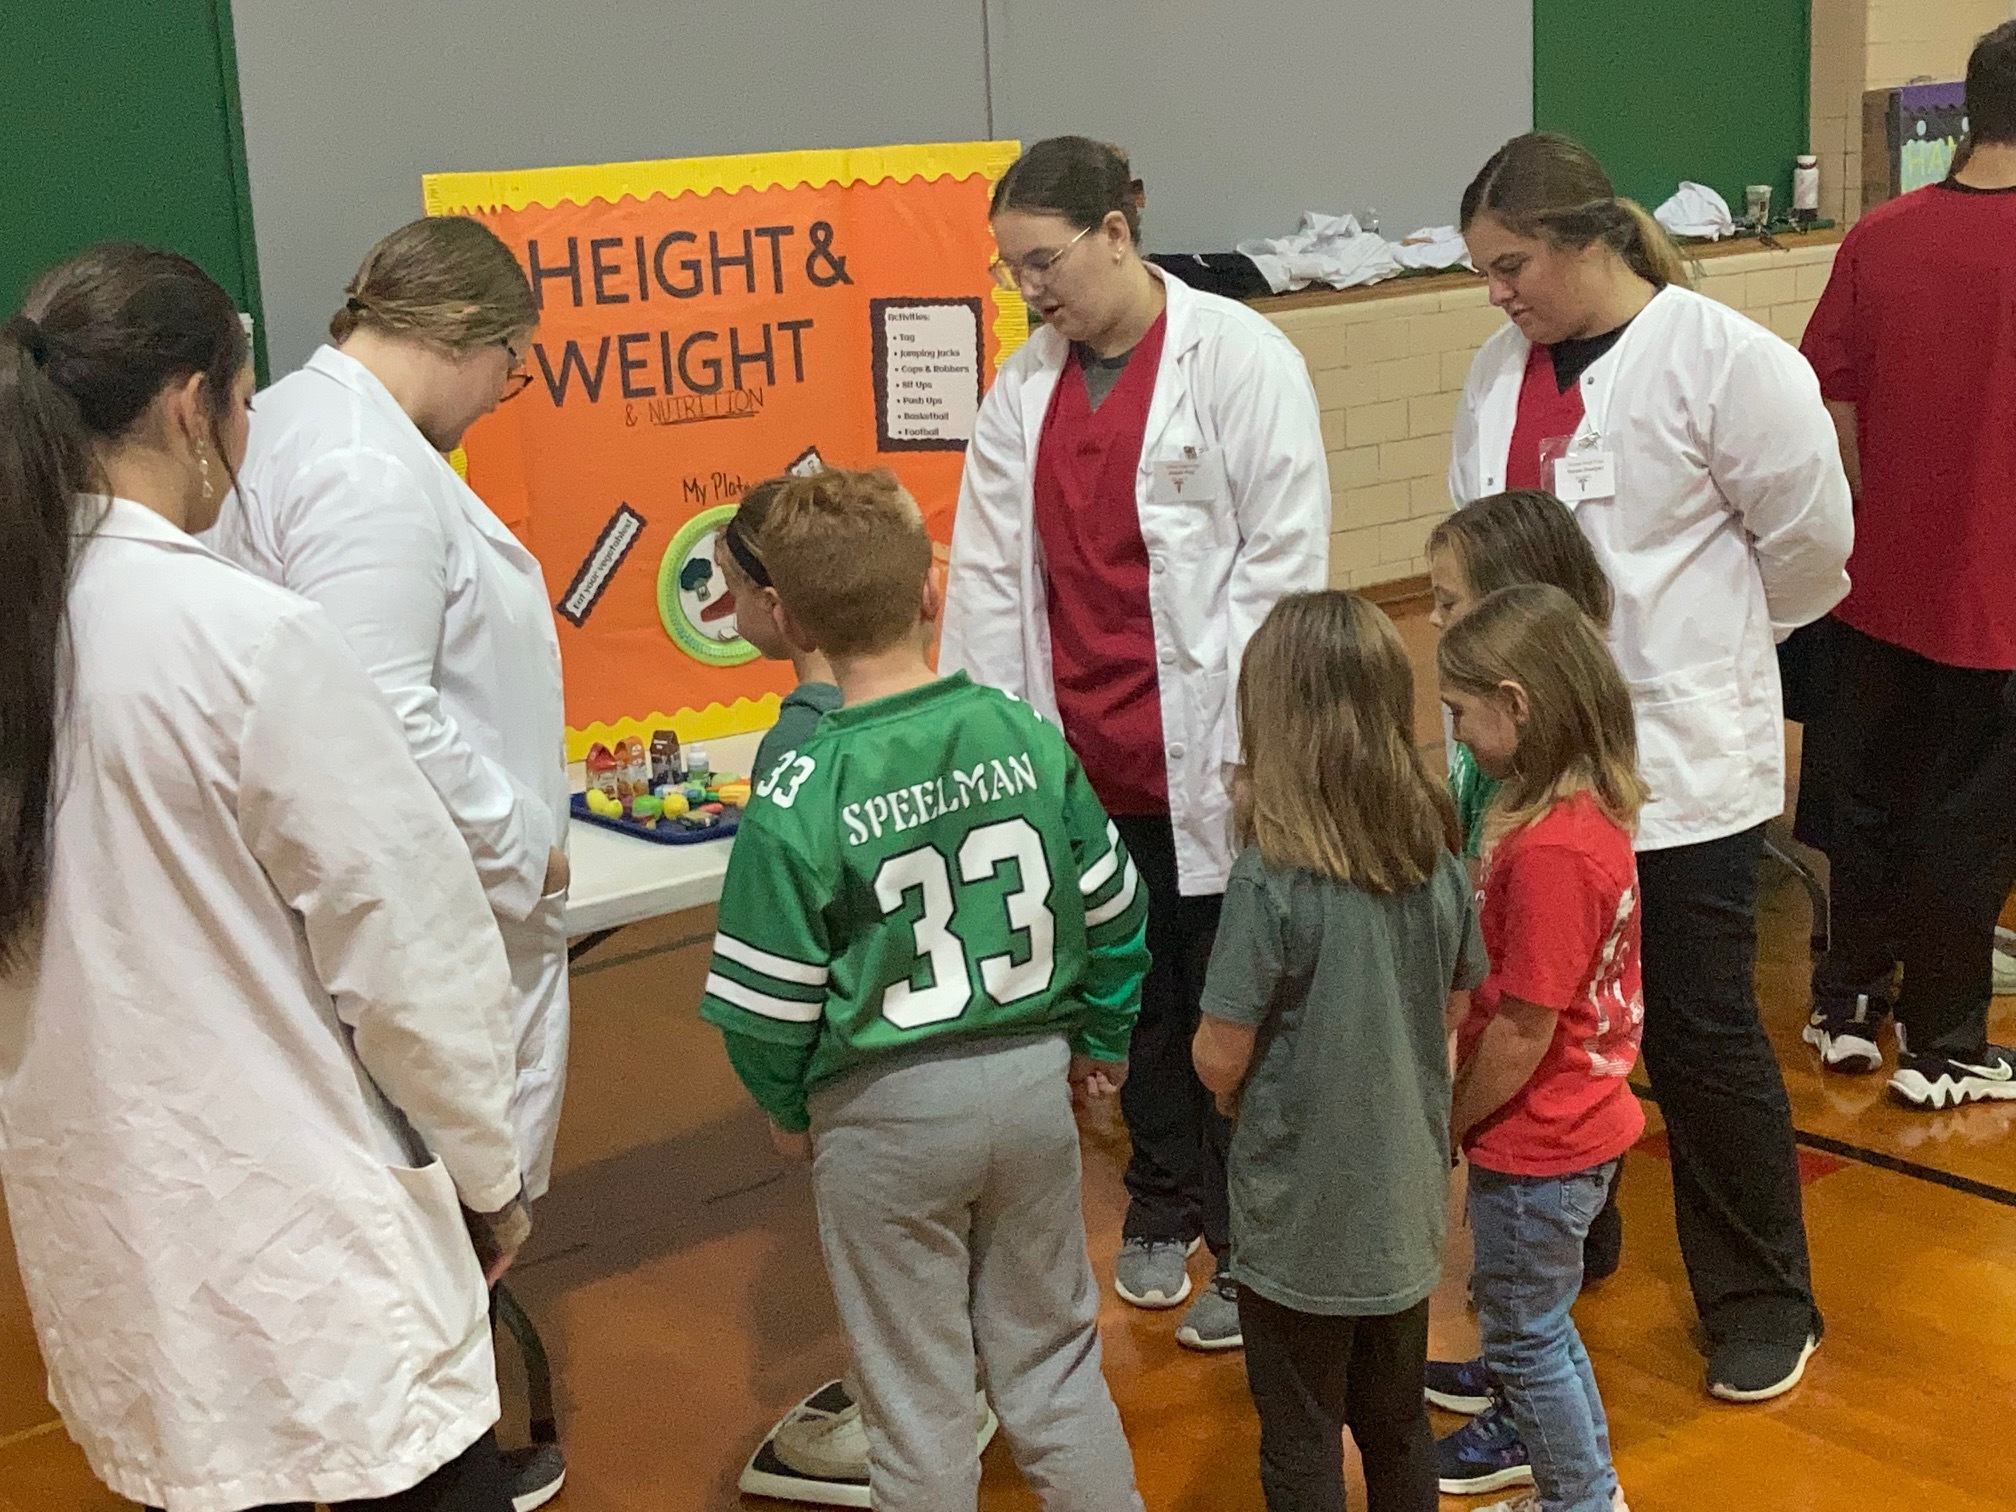 Tri Star Med Prep students in white coats talk to Celina primary school students at their height and weight booth.: Featured Image 1 